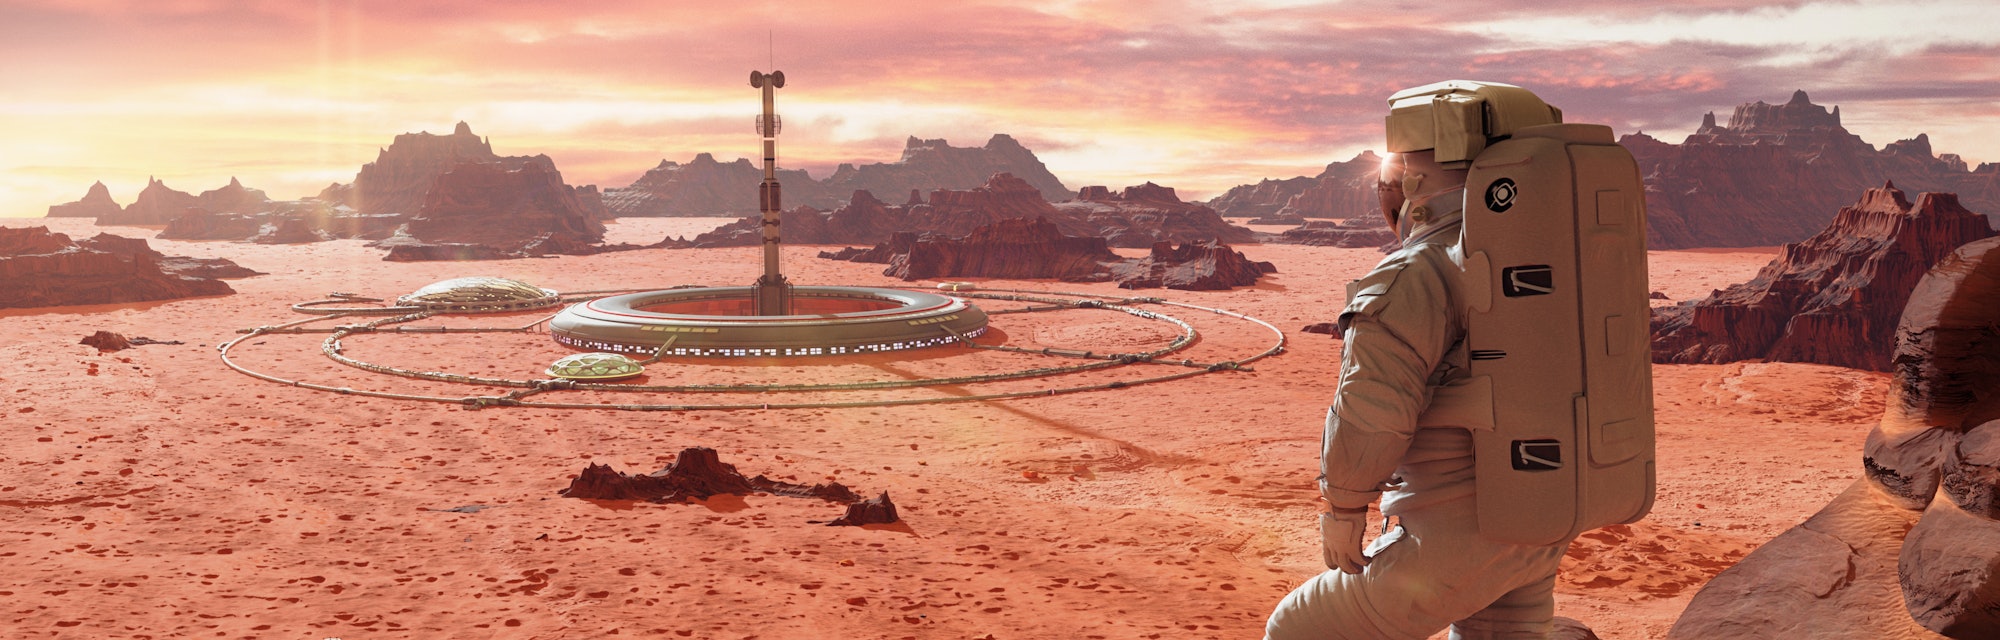 astronaut on planet Mars, looking at a martian colony (3d science illustration) 